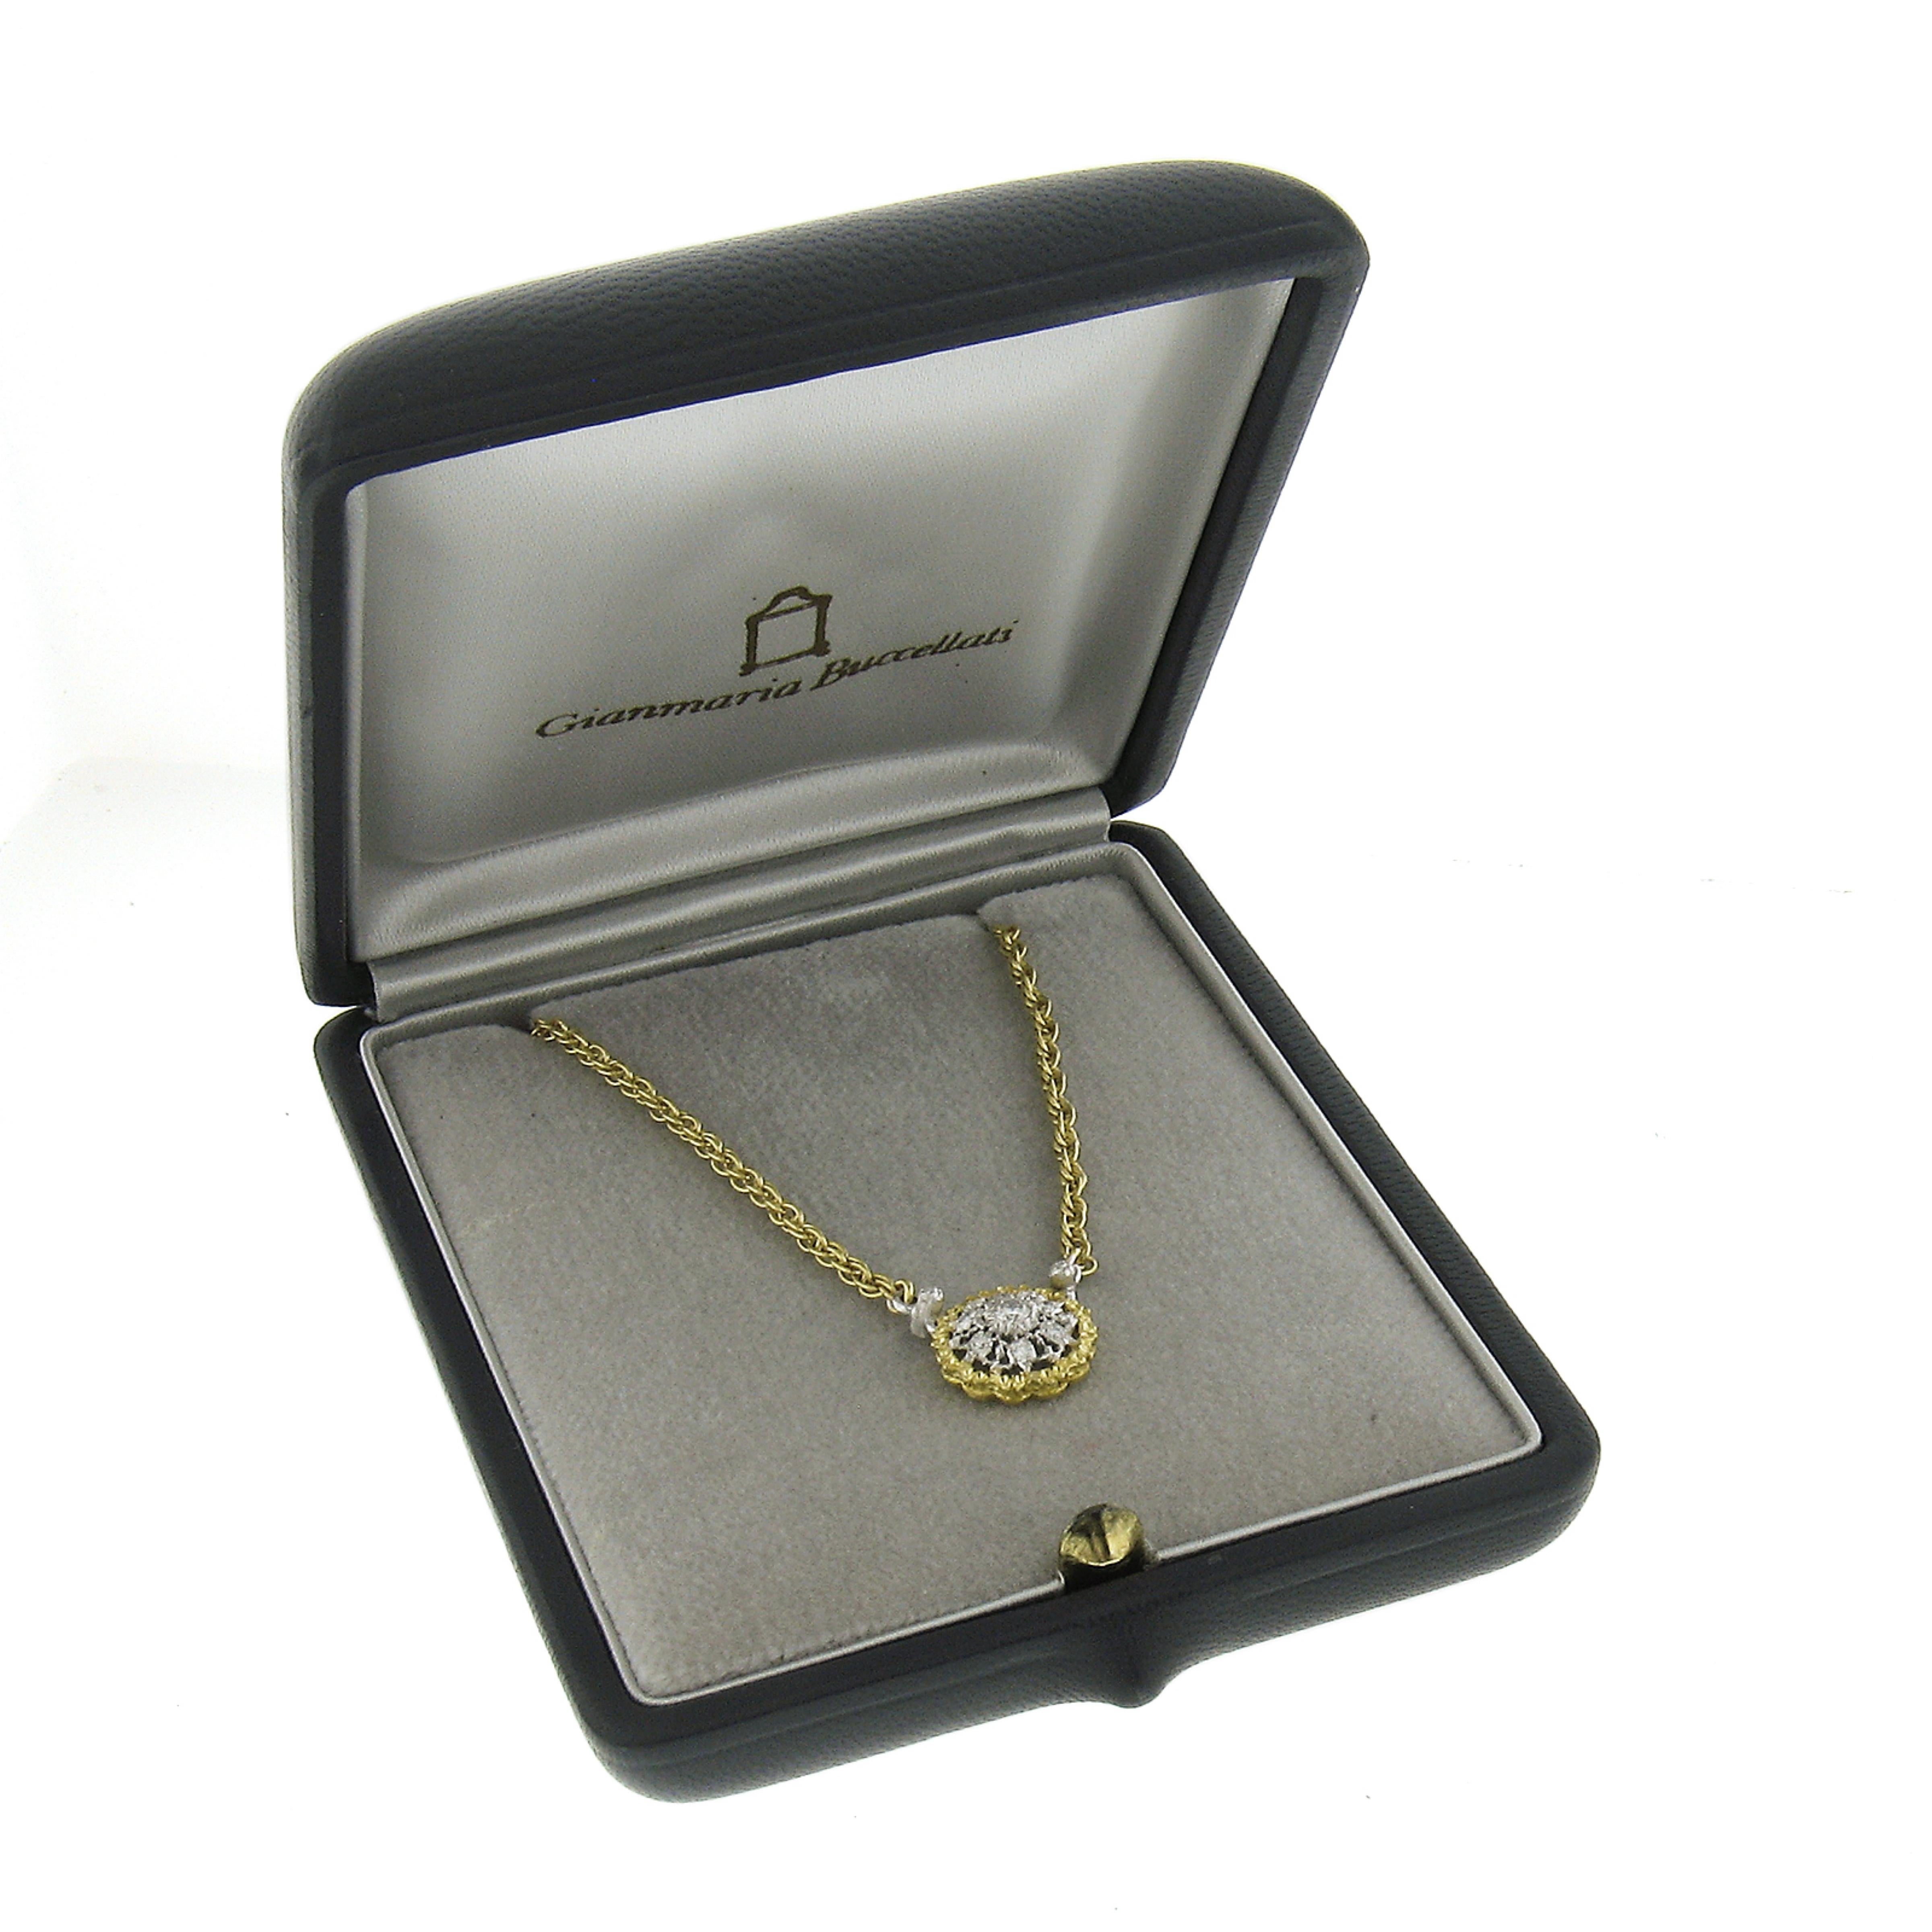 This adorable Italian diamond pendant necklace by Buccellati is crafted in solid 18k yellow gold with white gold accents and features a cluster of 7 fiery brilliant and sparkly round brilliant cut diamonds pave set in the adorable cluster circle